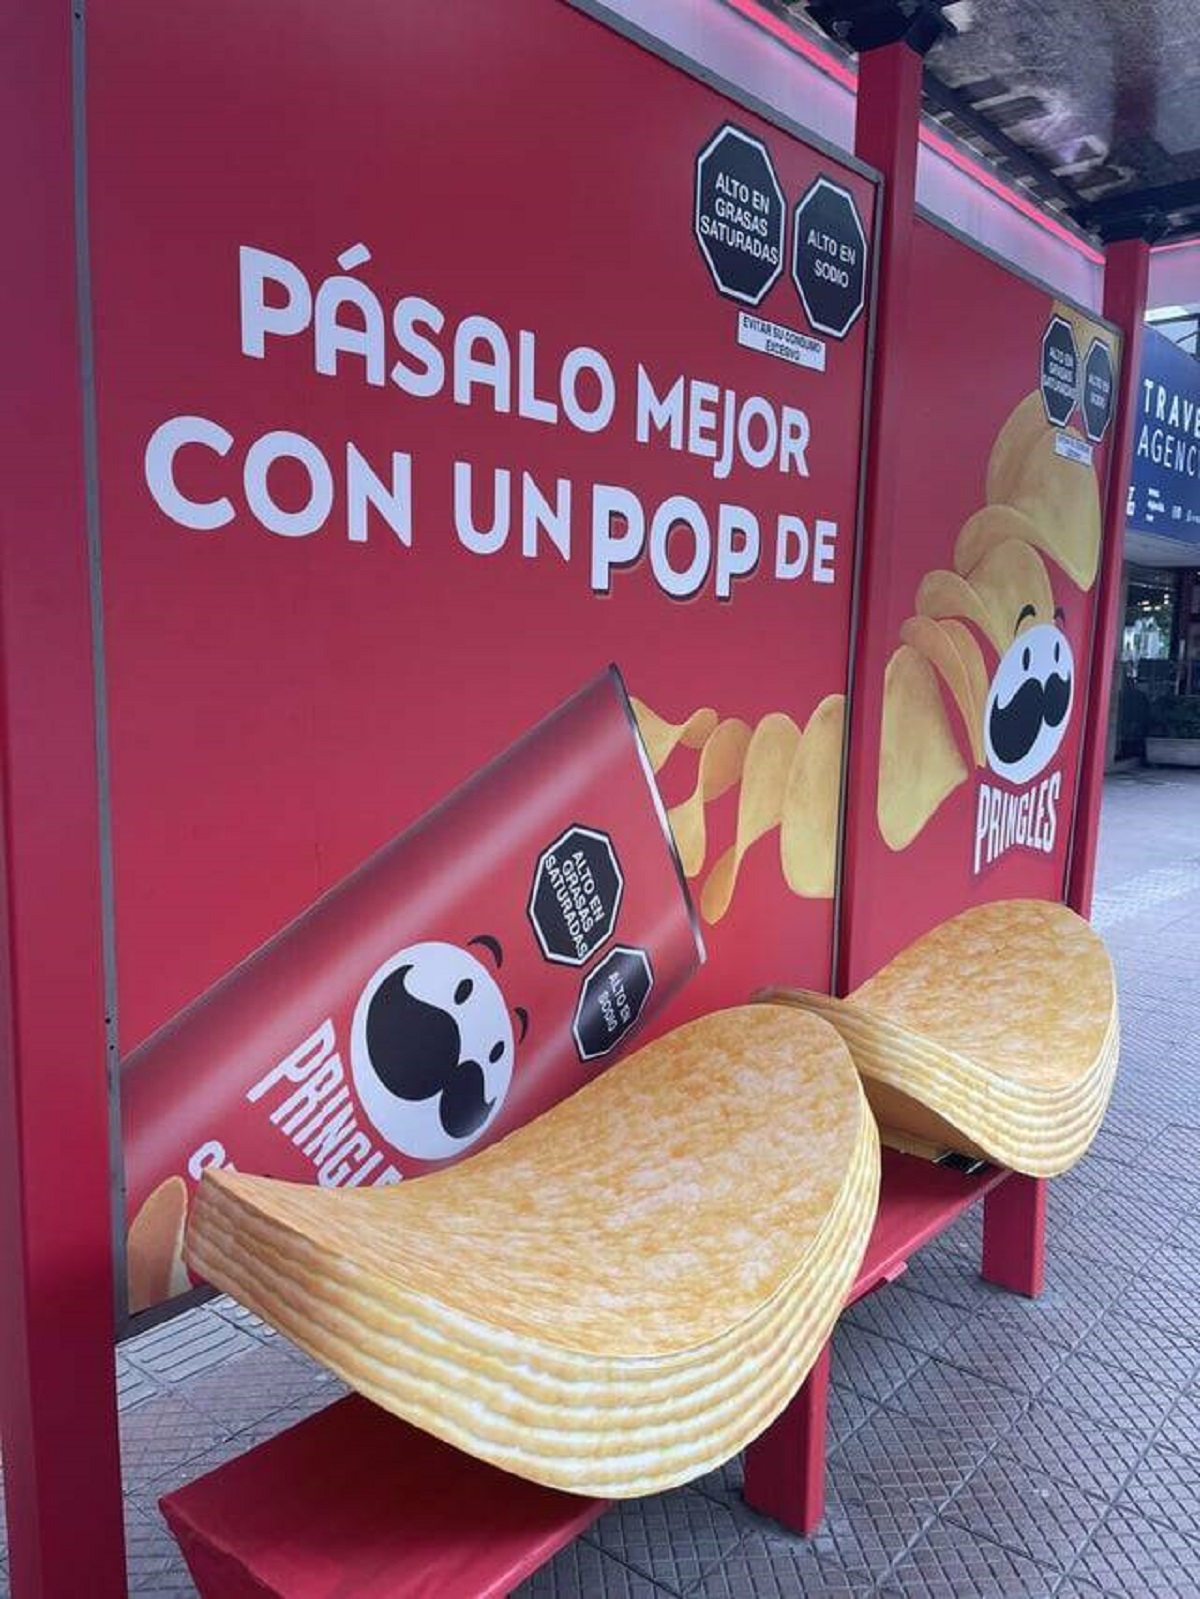 "Pringle shaped seats at a bus stop in Lima"